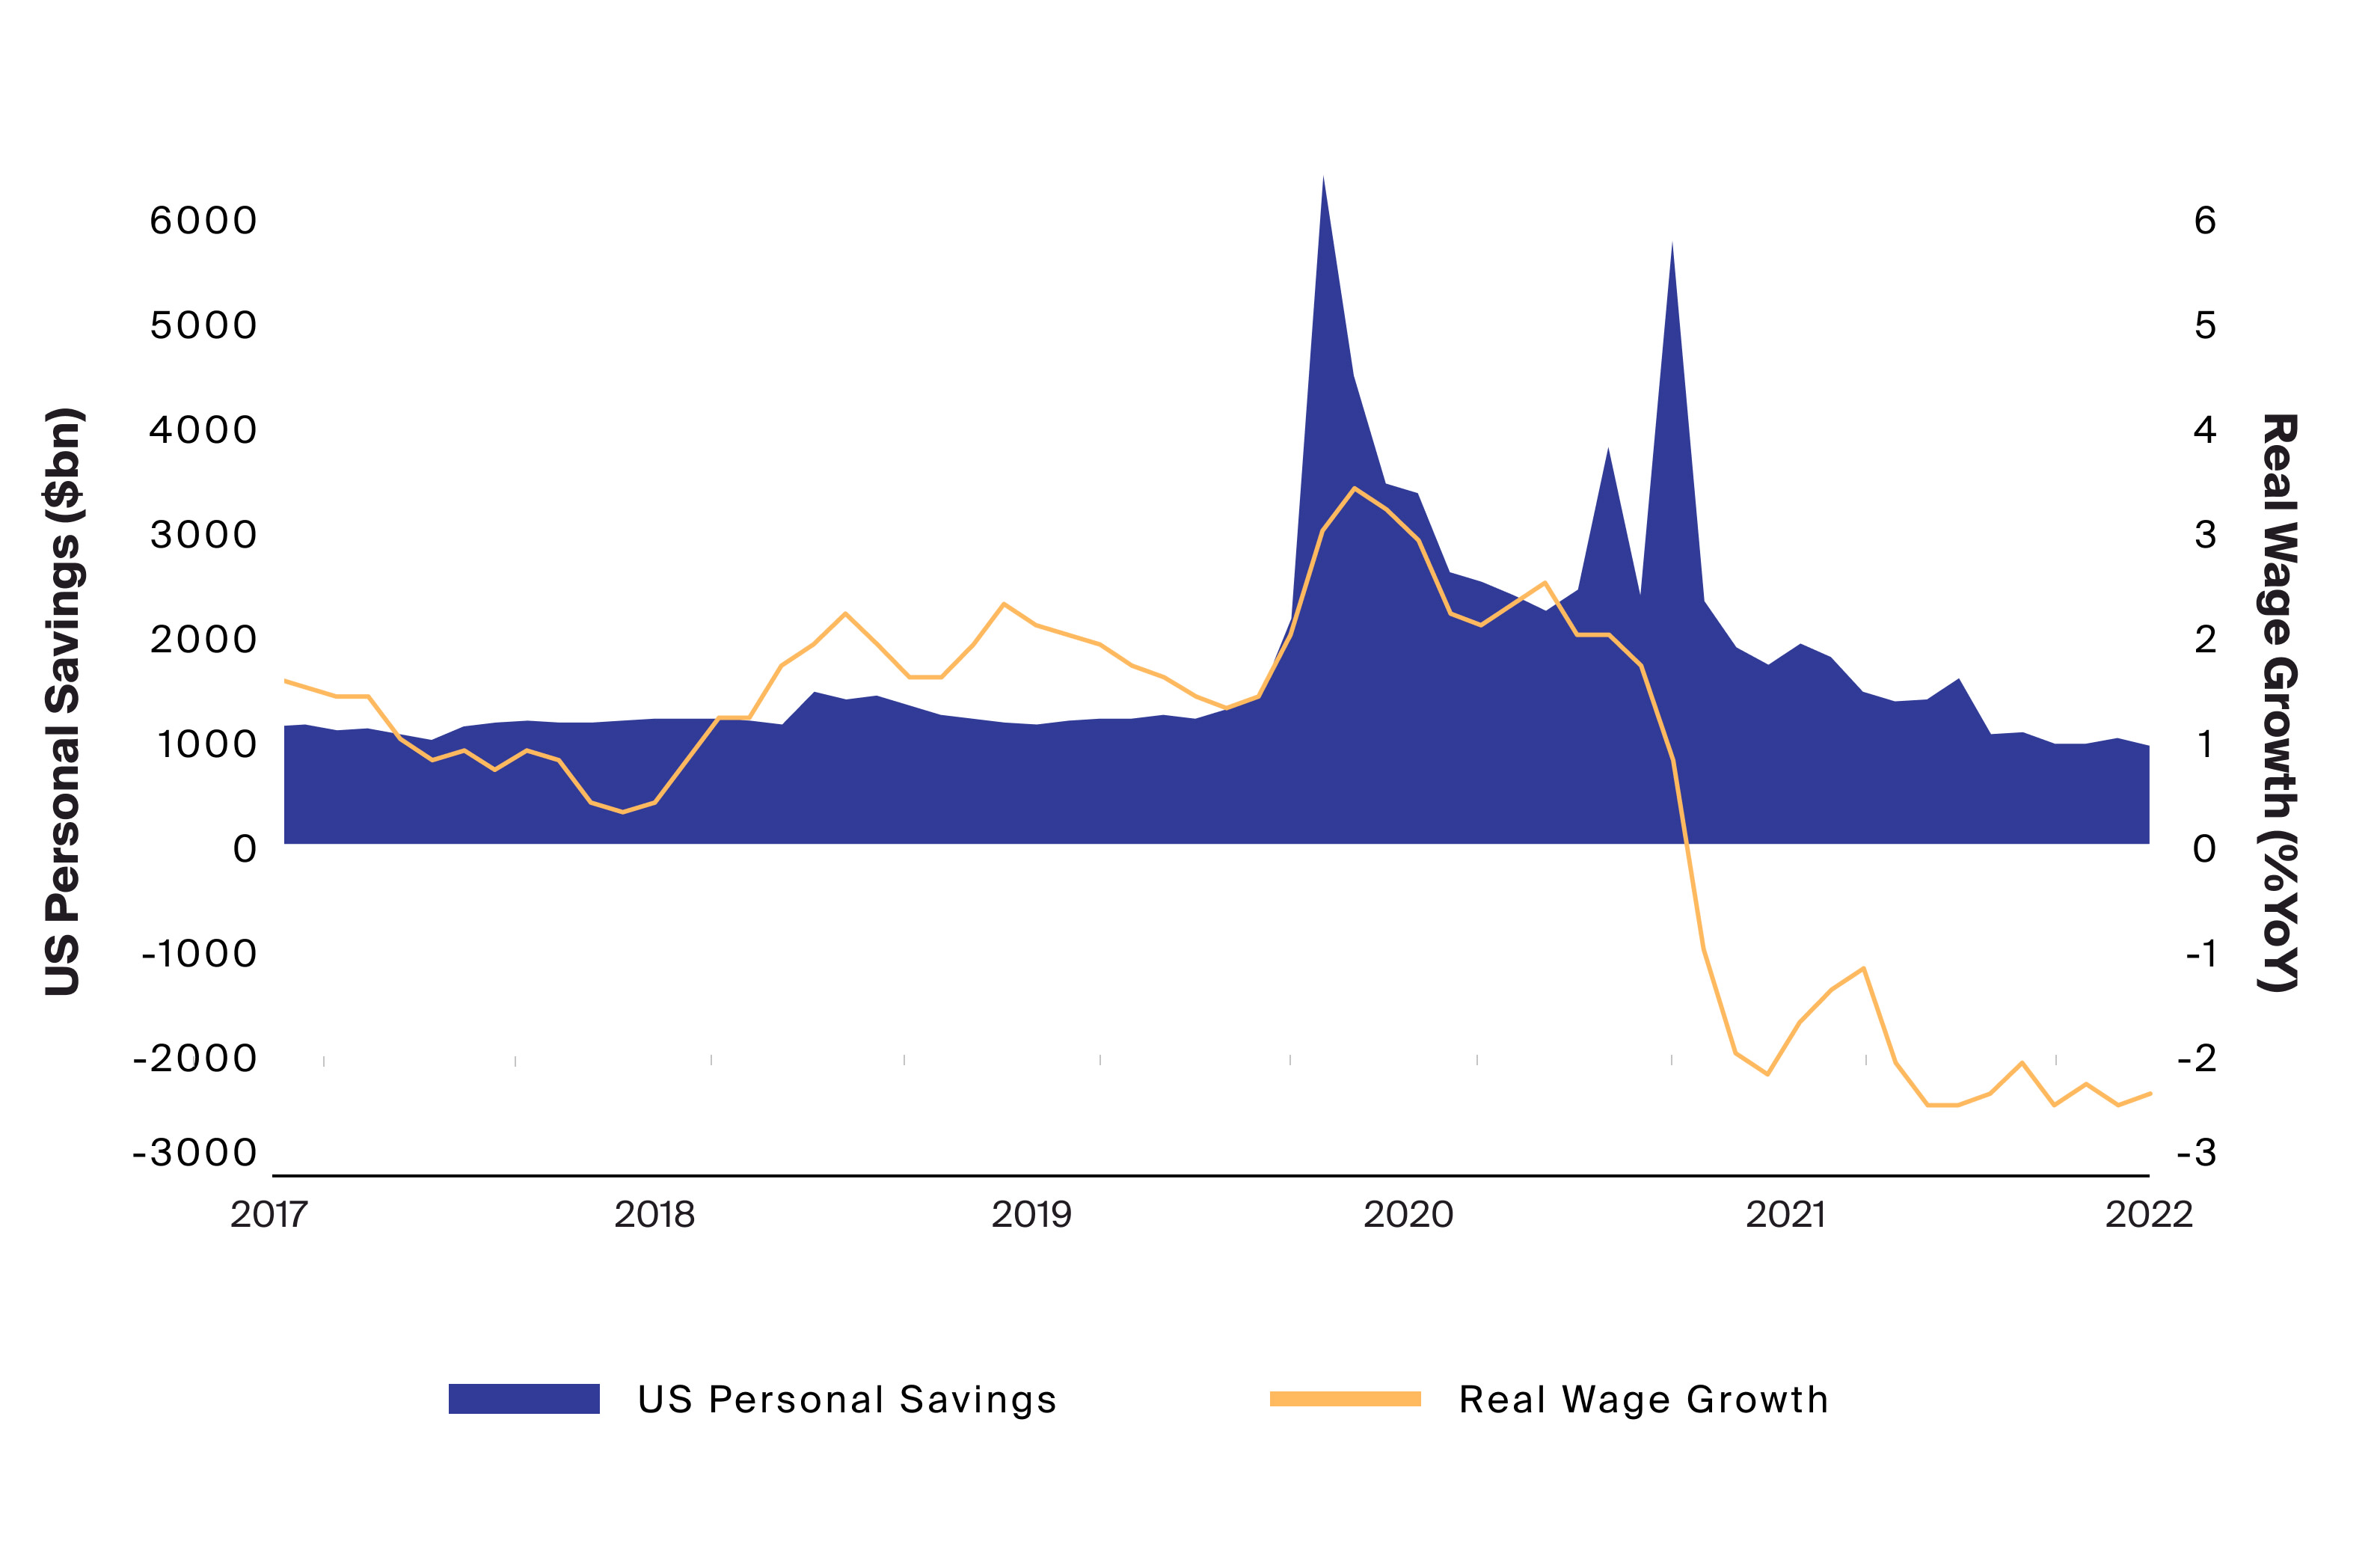 As personal savings drain from pandemic highs, real wage growth faces pressure from elevated inflation and a labor market shows signs of weakness